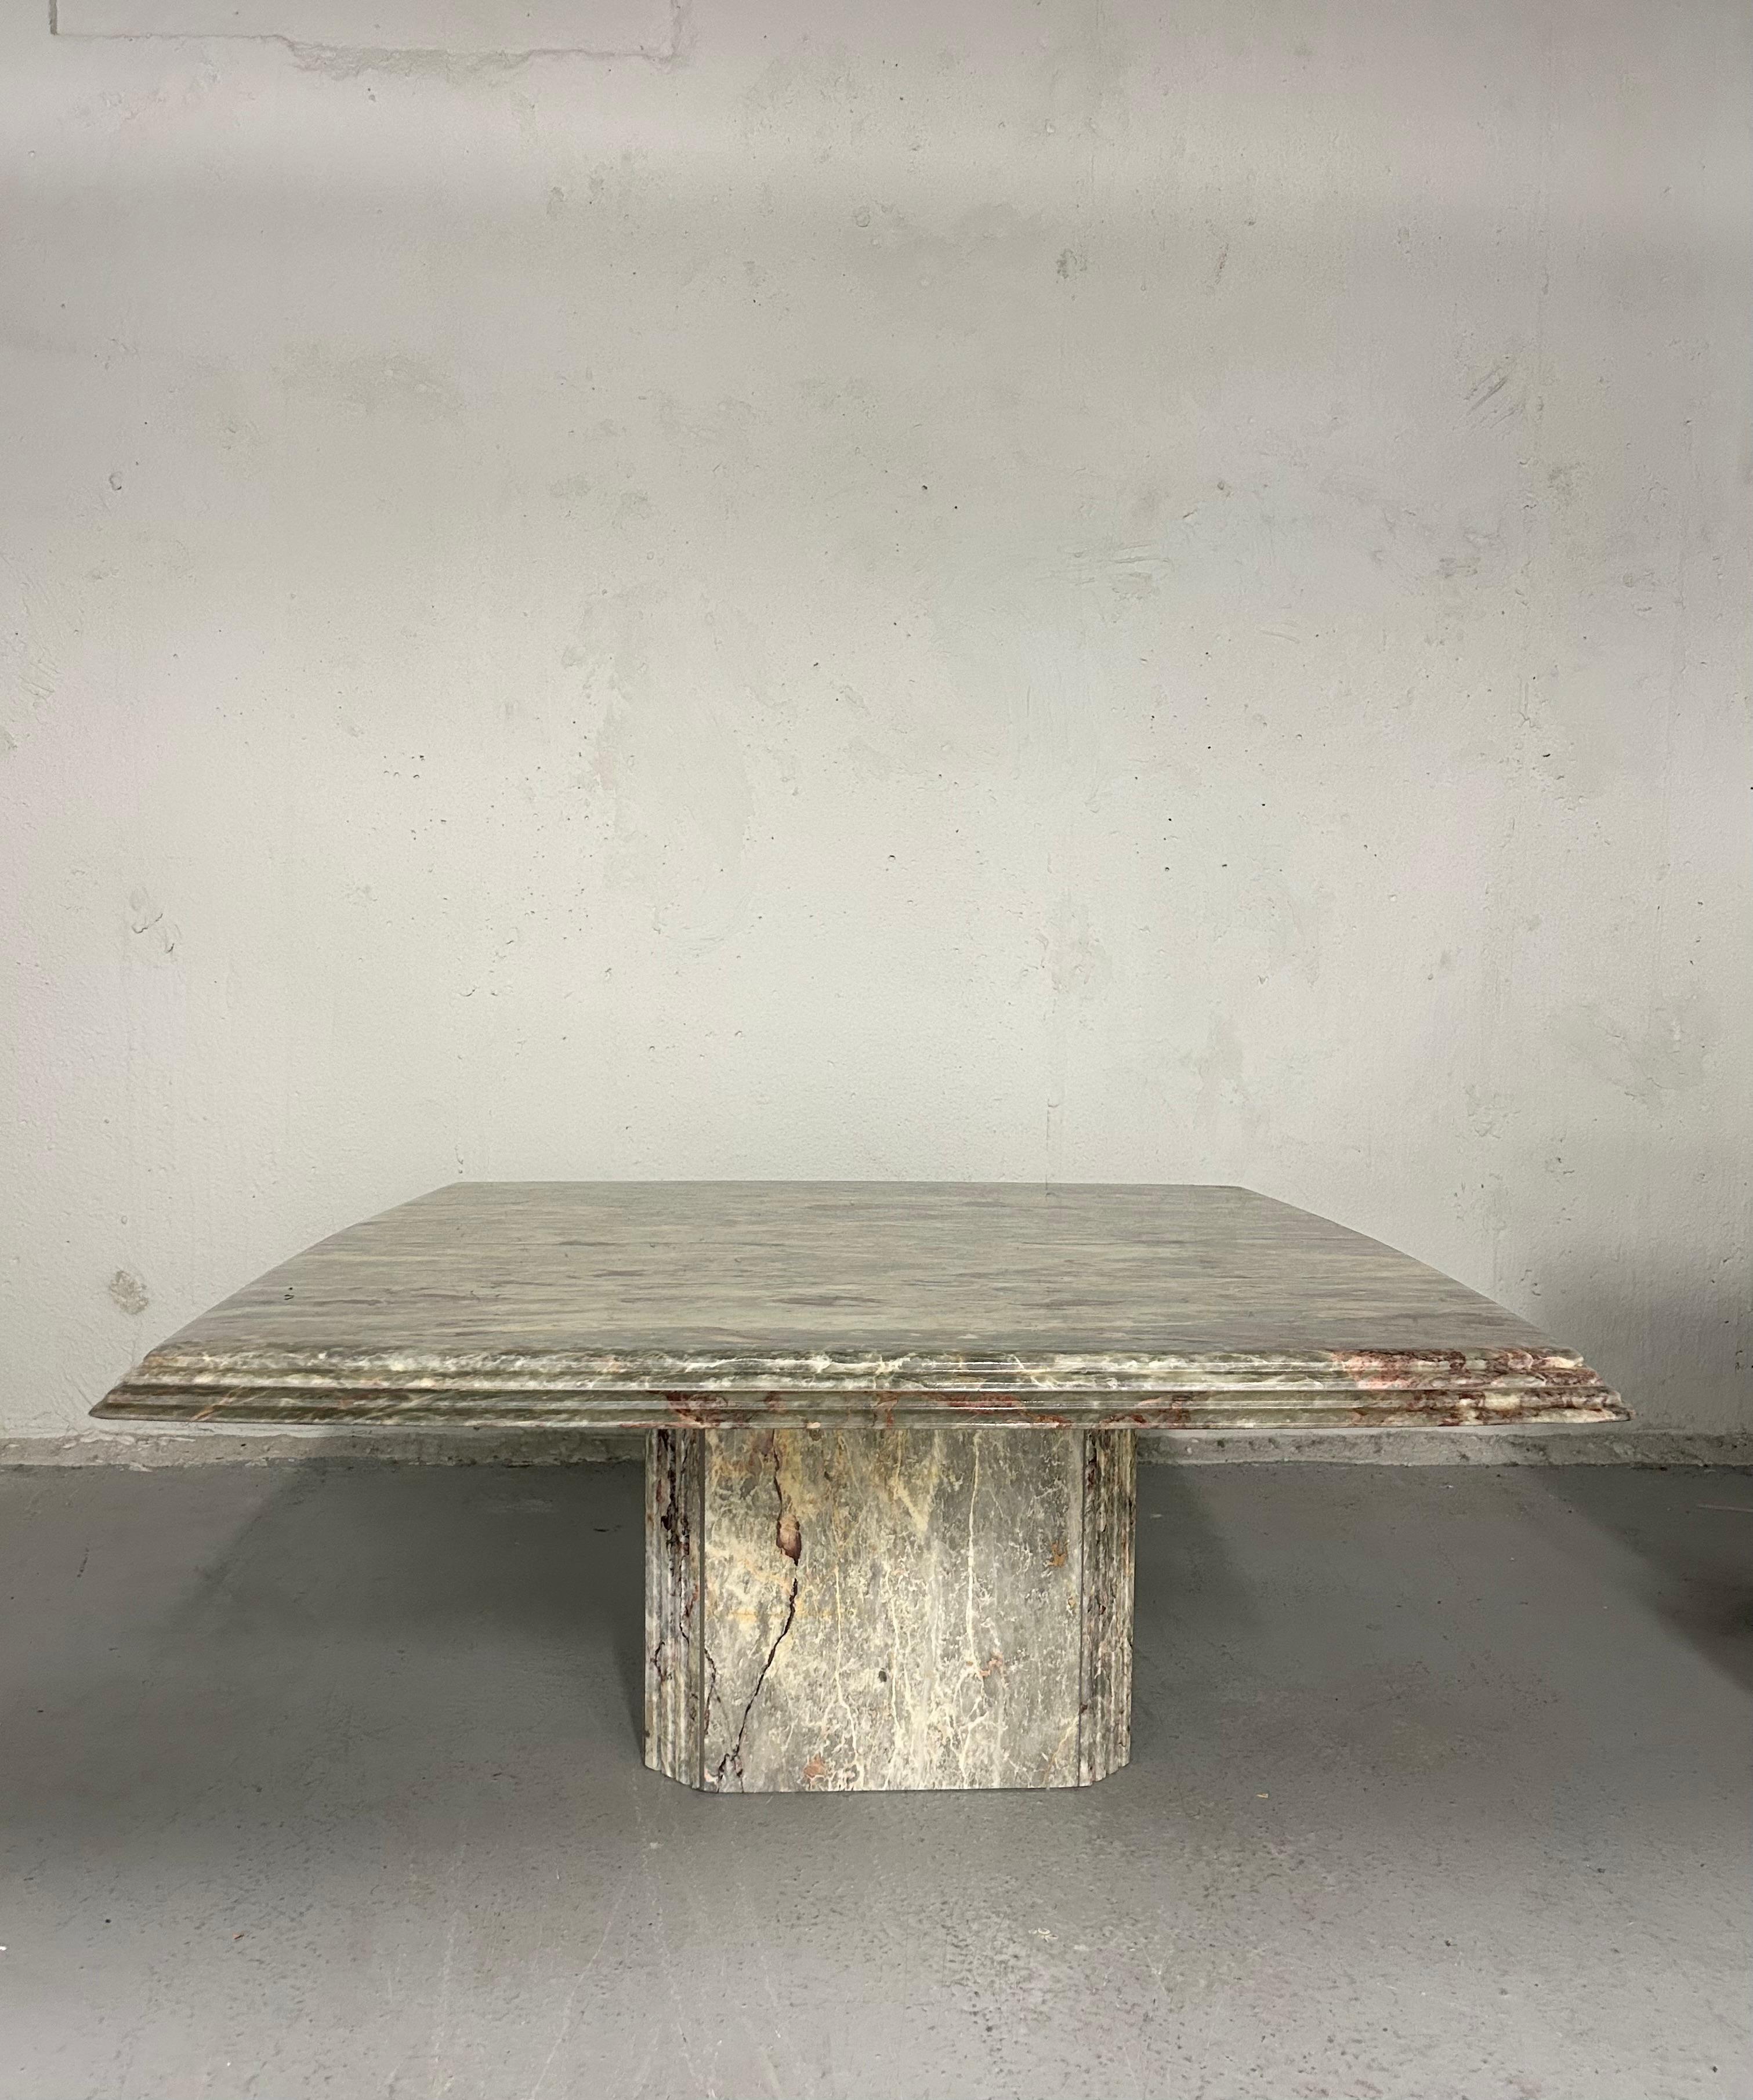 Vintage fior di pesco marble coffee table. Has beveled edge and slight curve to each side at the top. Had a protective screen on the top surface so the table has minimal wear. No chips or cracks, no scratches. 